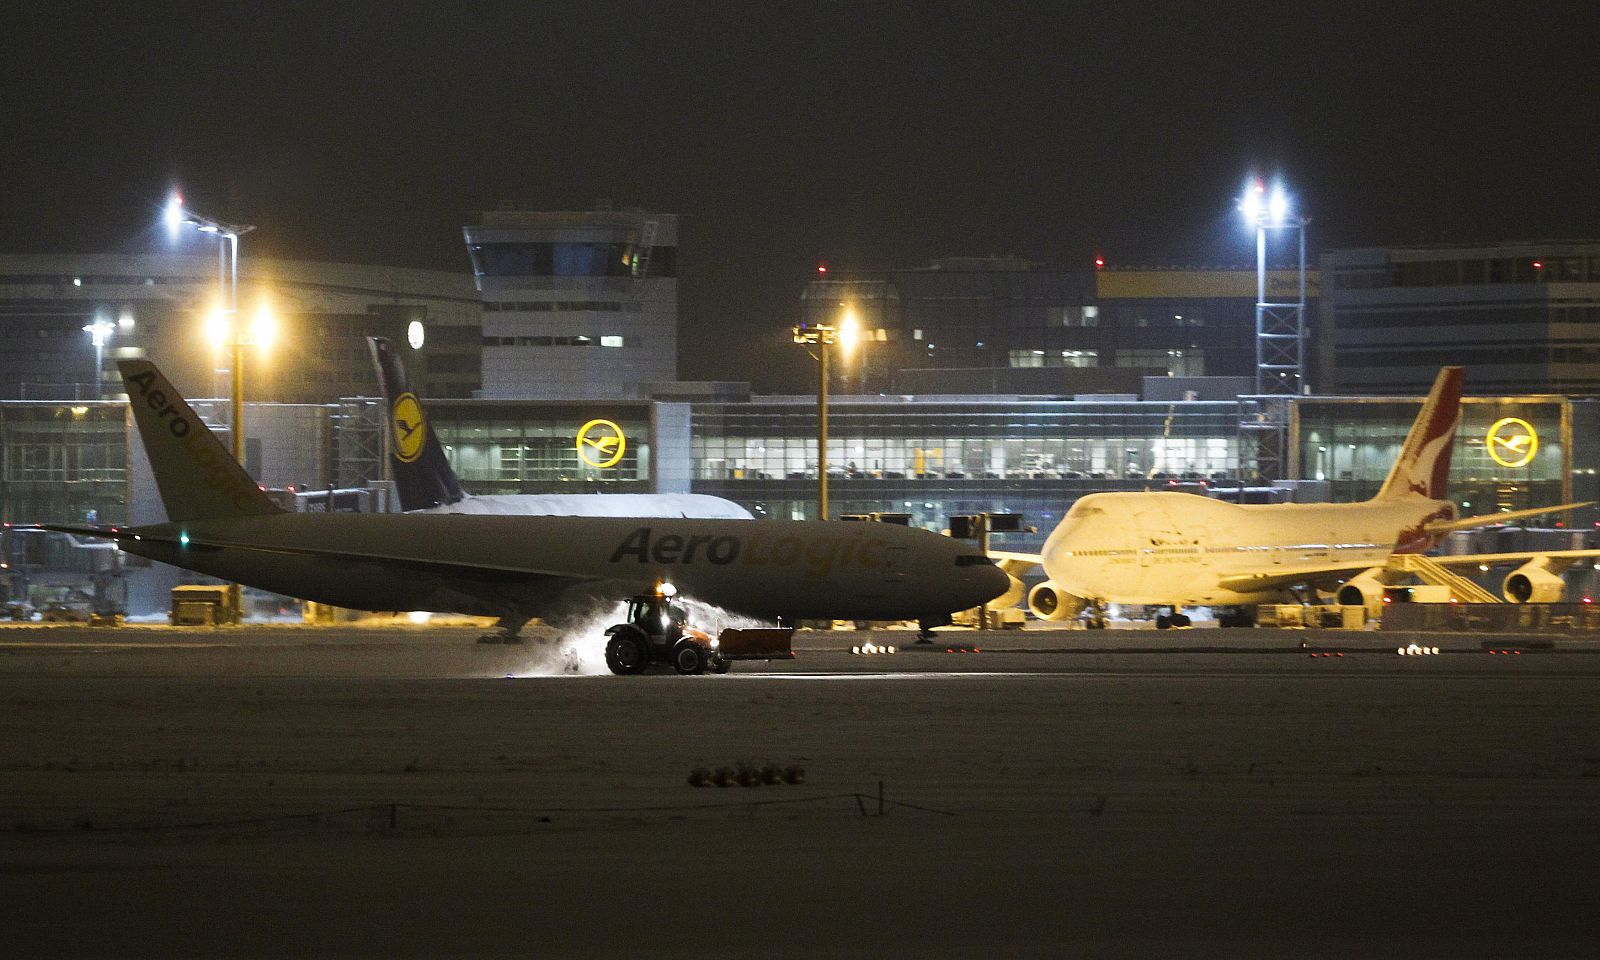 A snow plough clears the runways after heavy snowfall at Frankfurt's airport